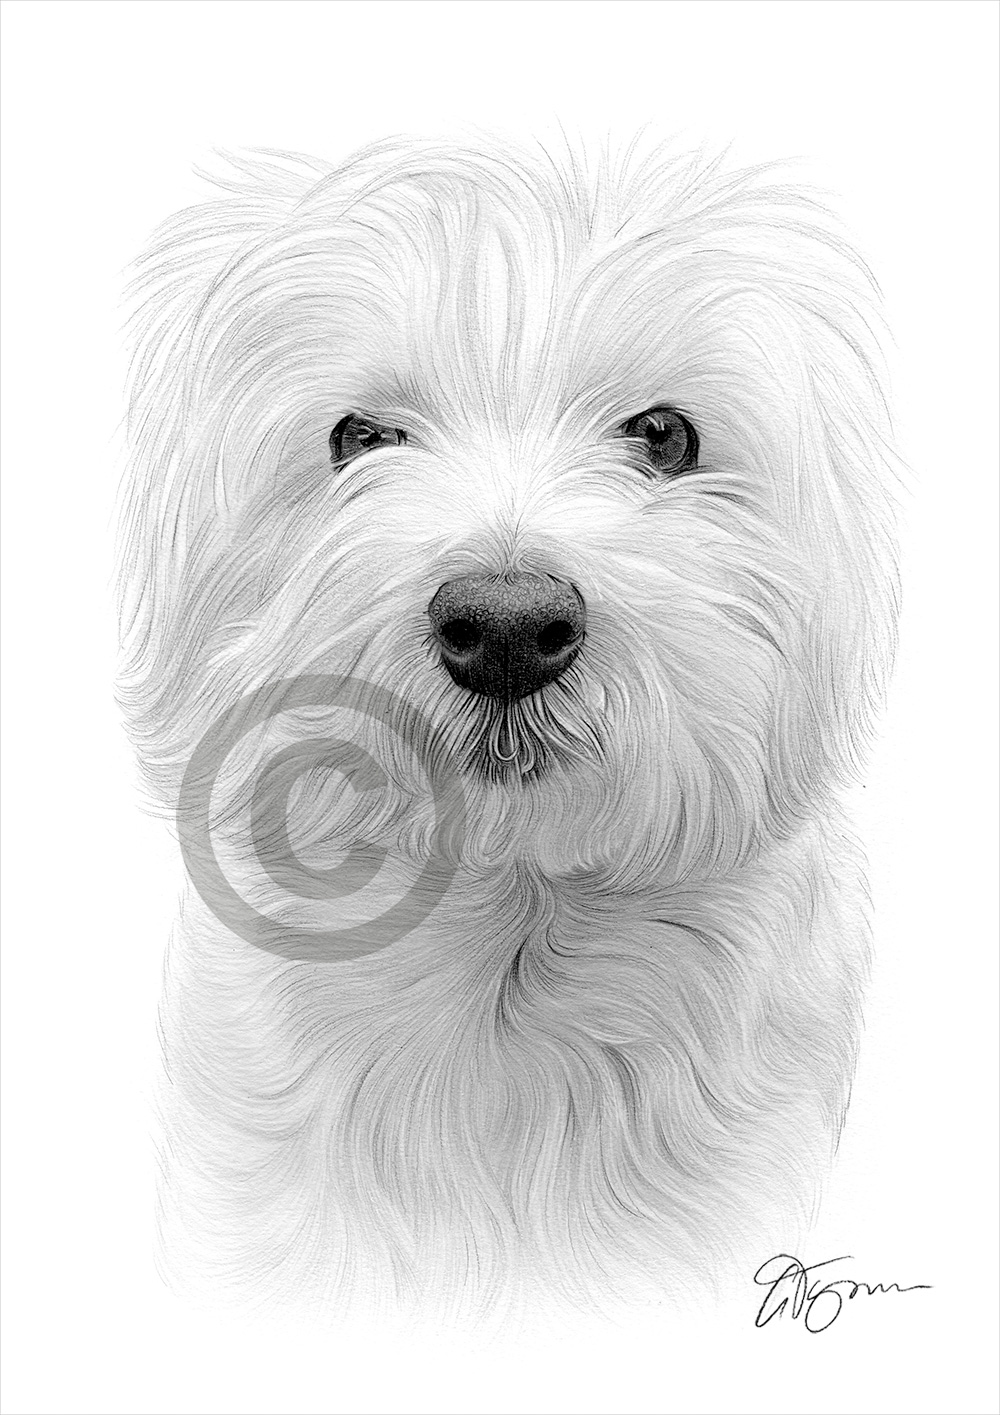 Pencil drawing commission of a westie by artist Gary Tymon